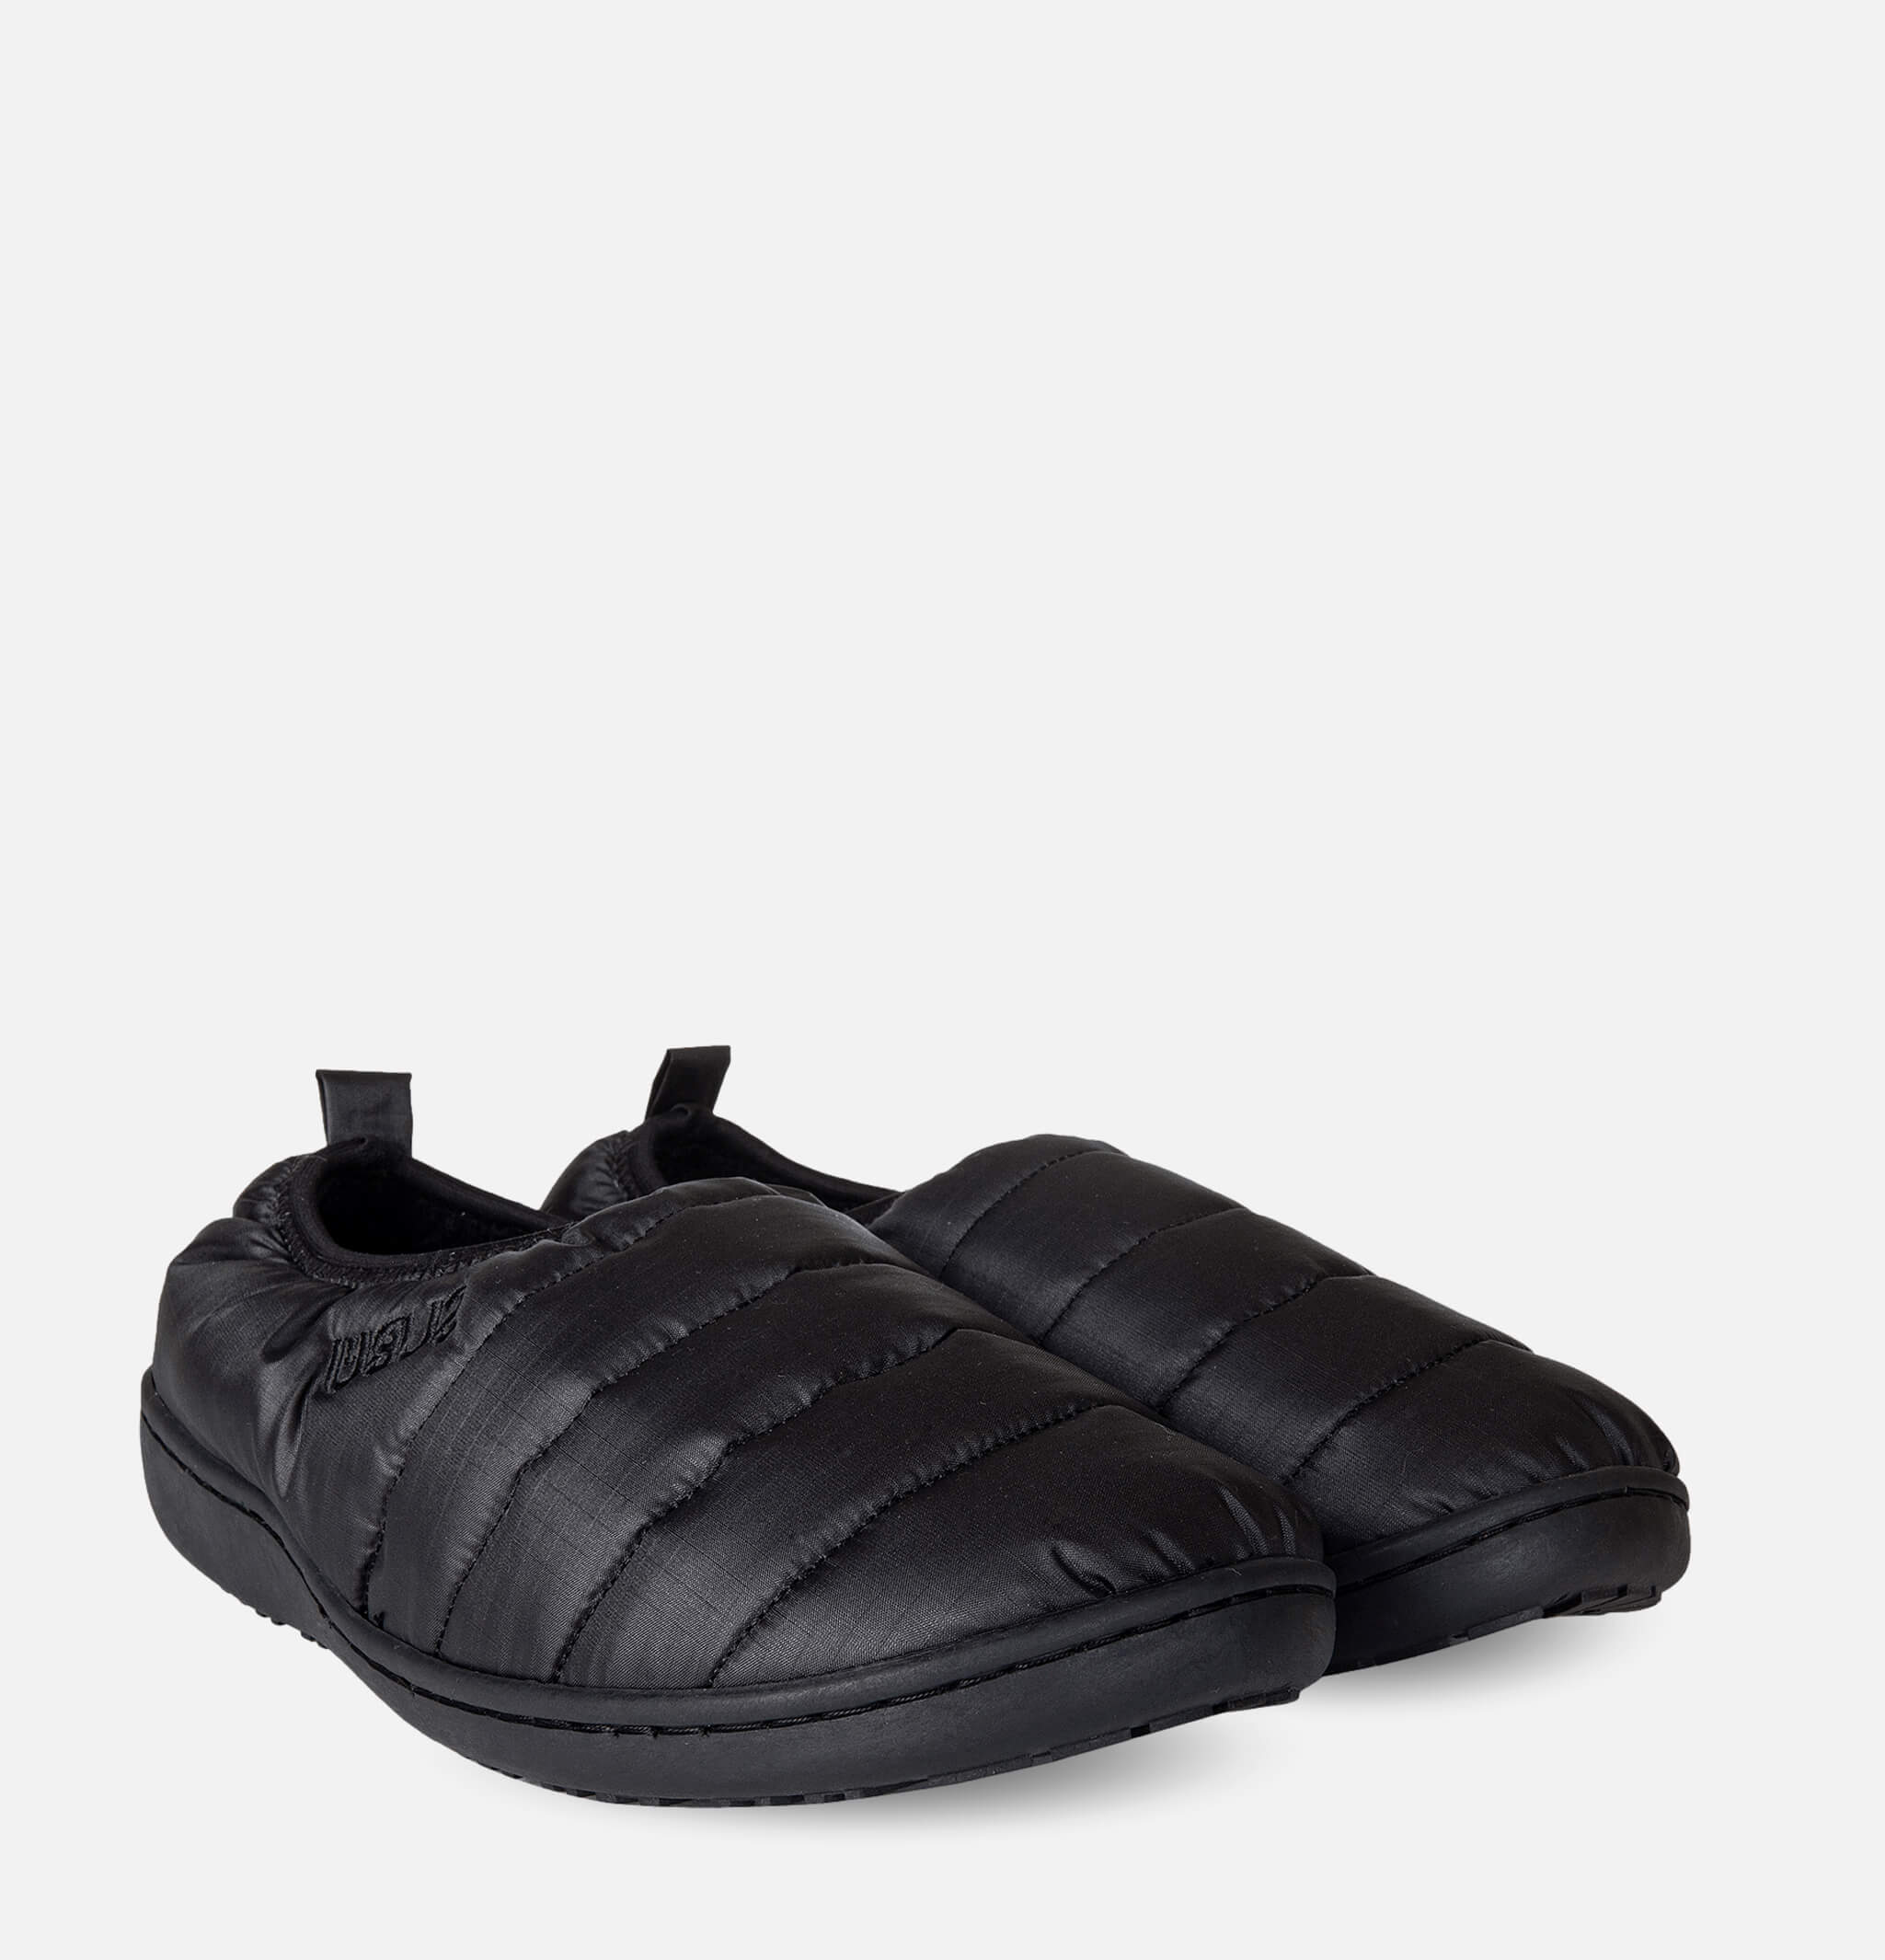 Chaussons Packable Black